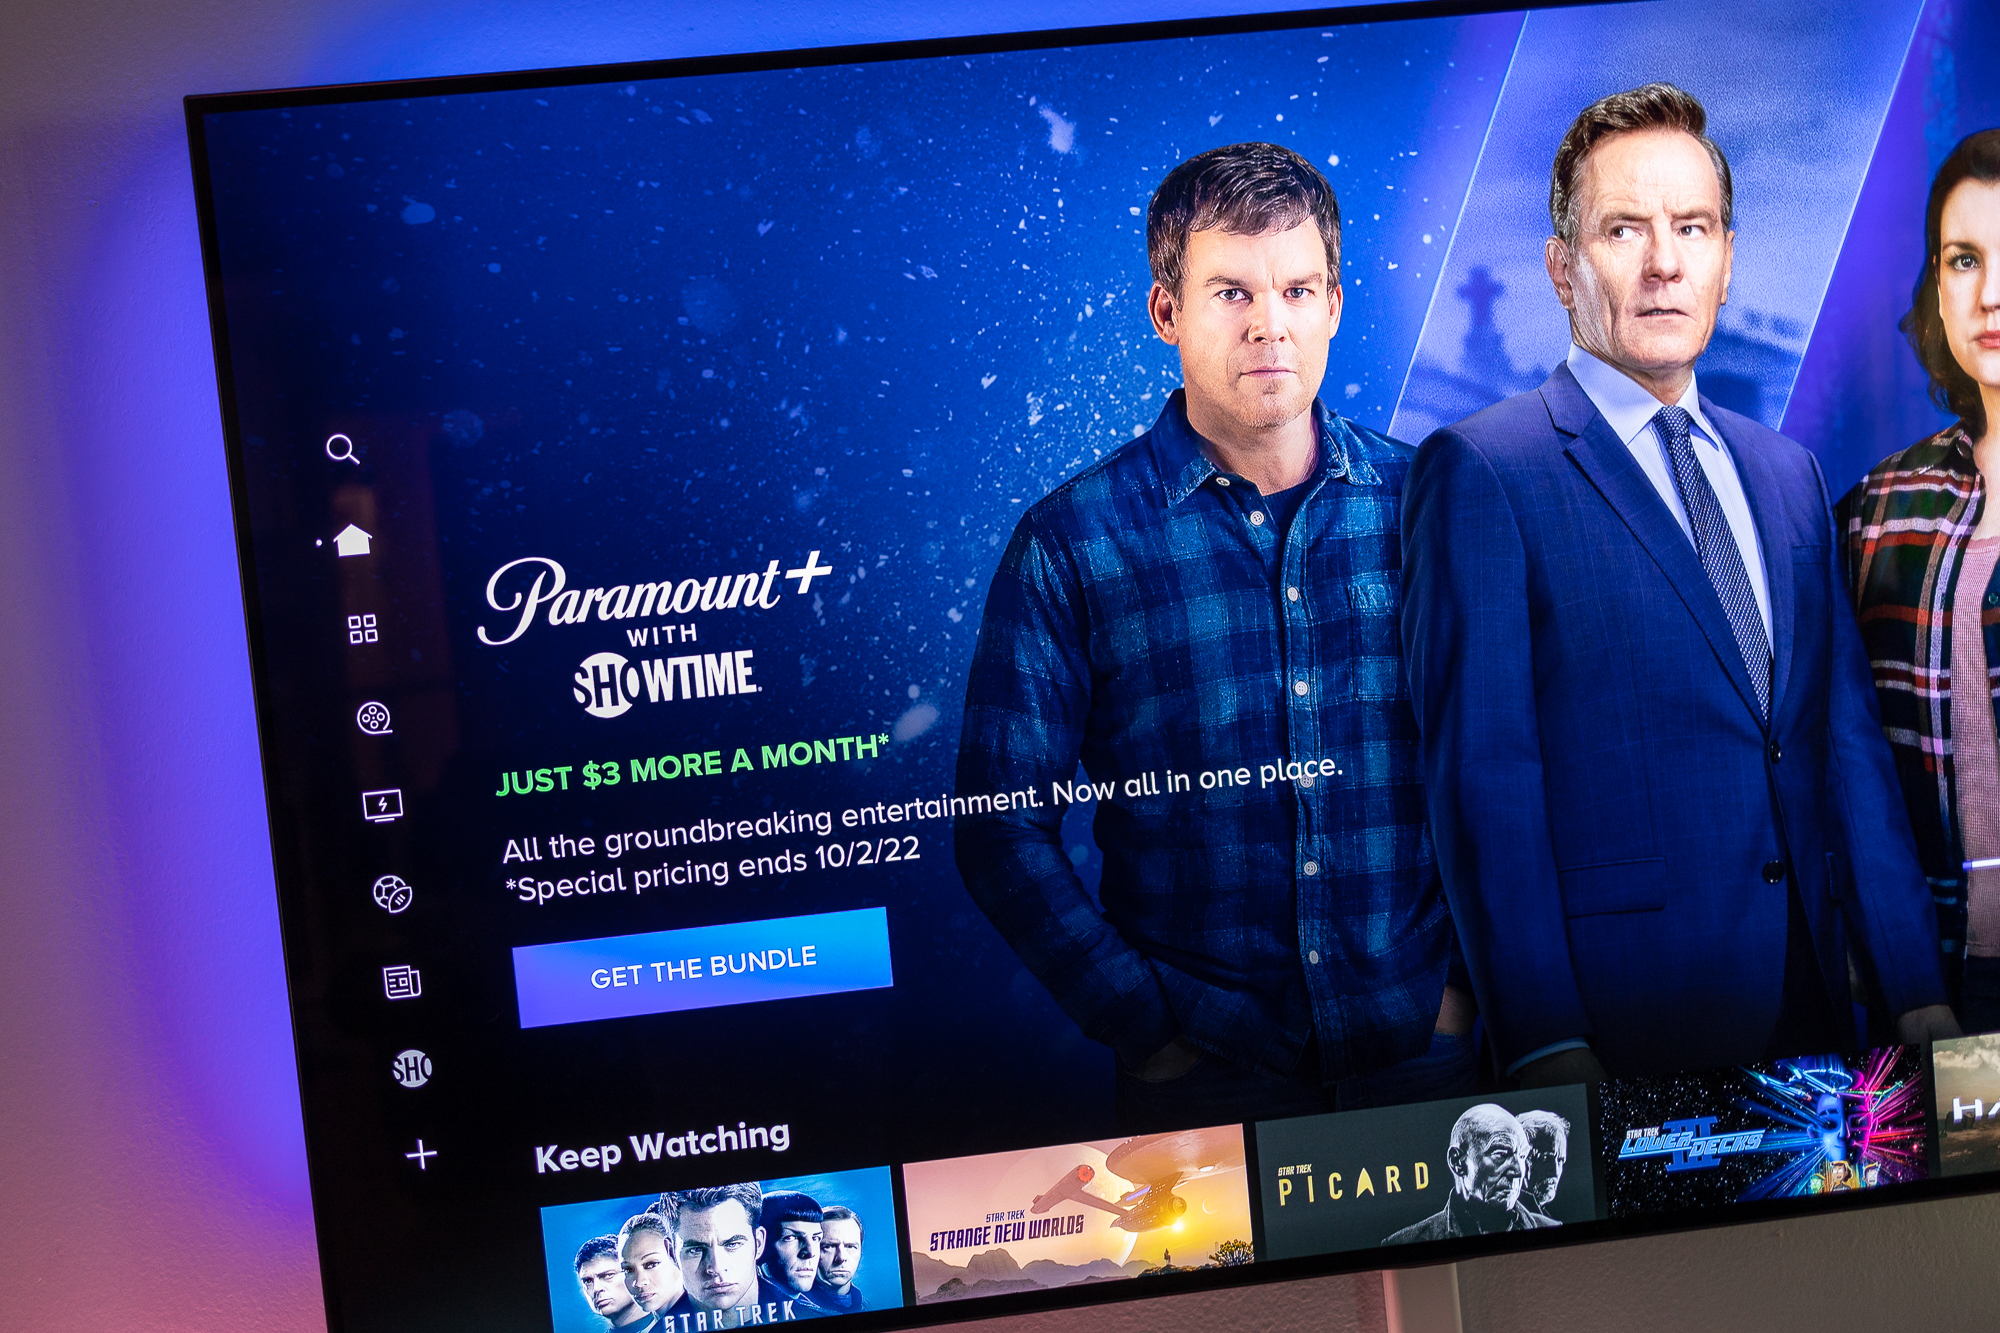 The Paramount+/Showtime bundle is now available Digital Trends